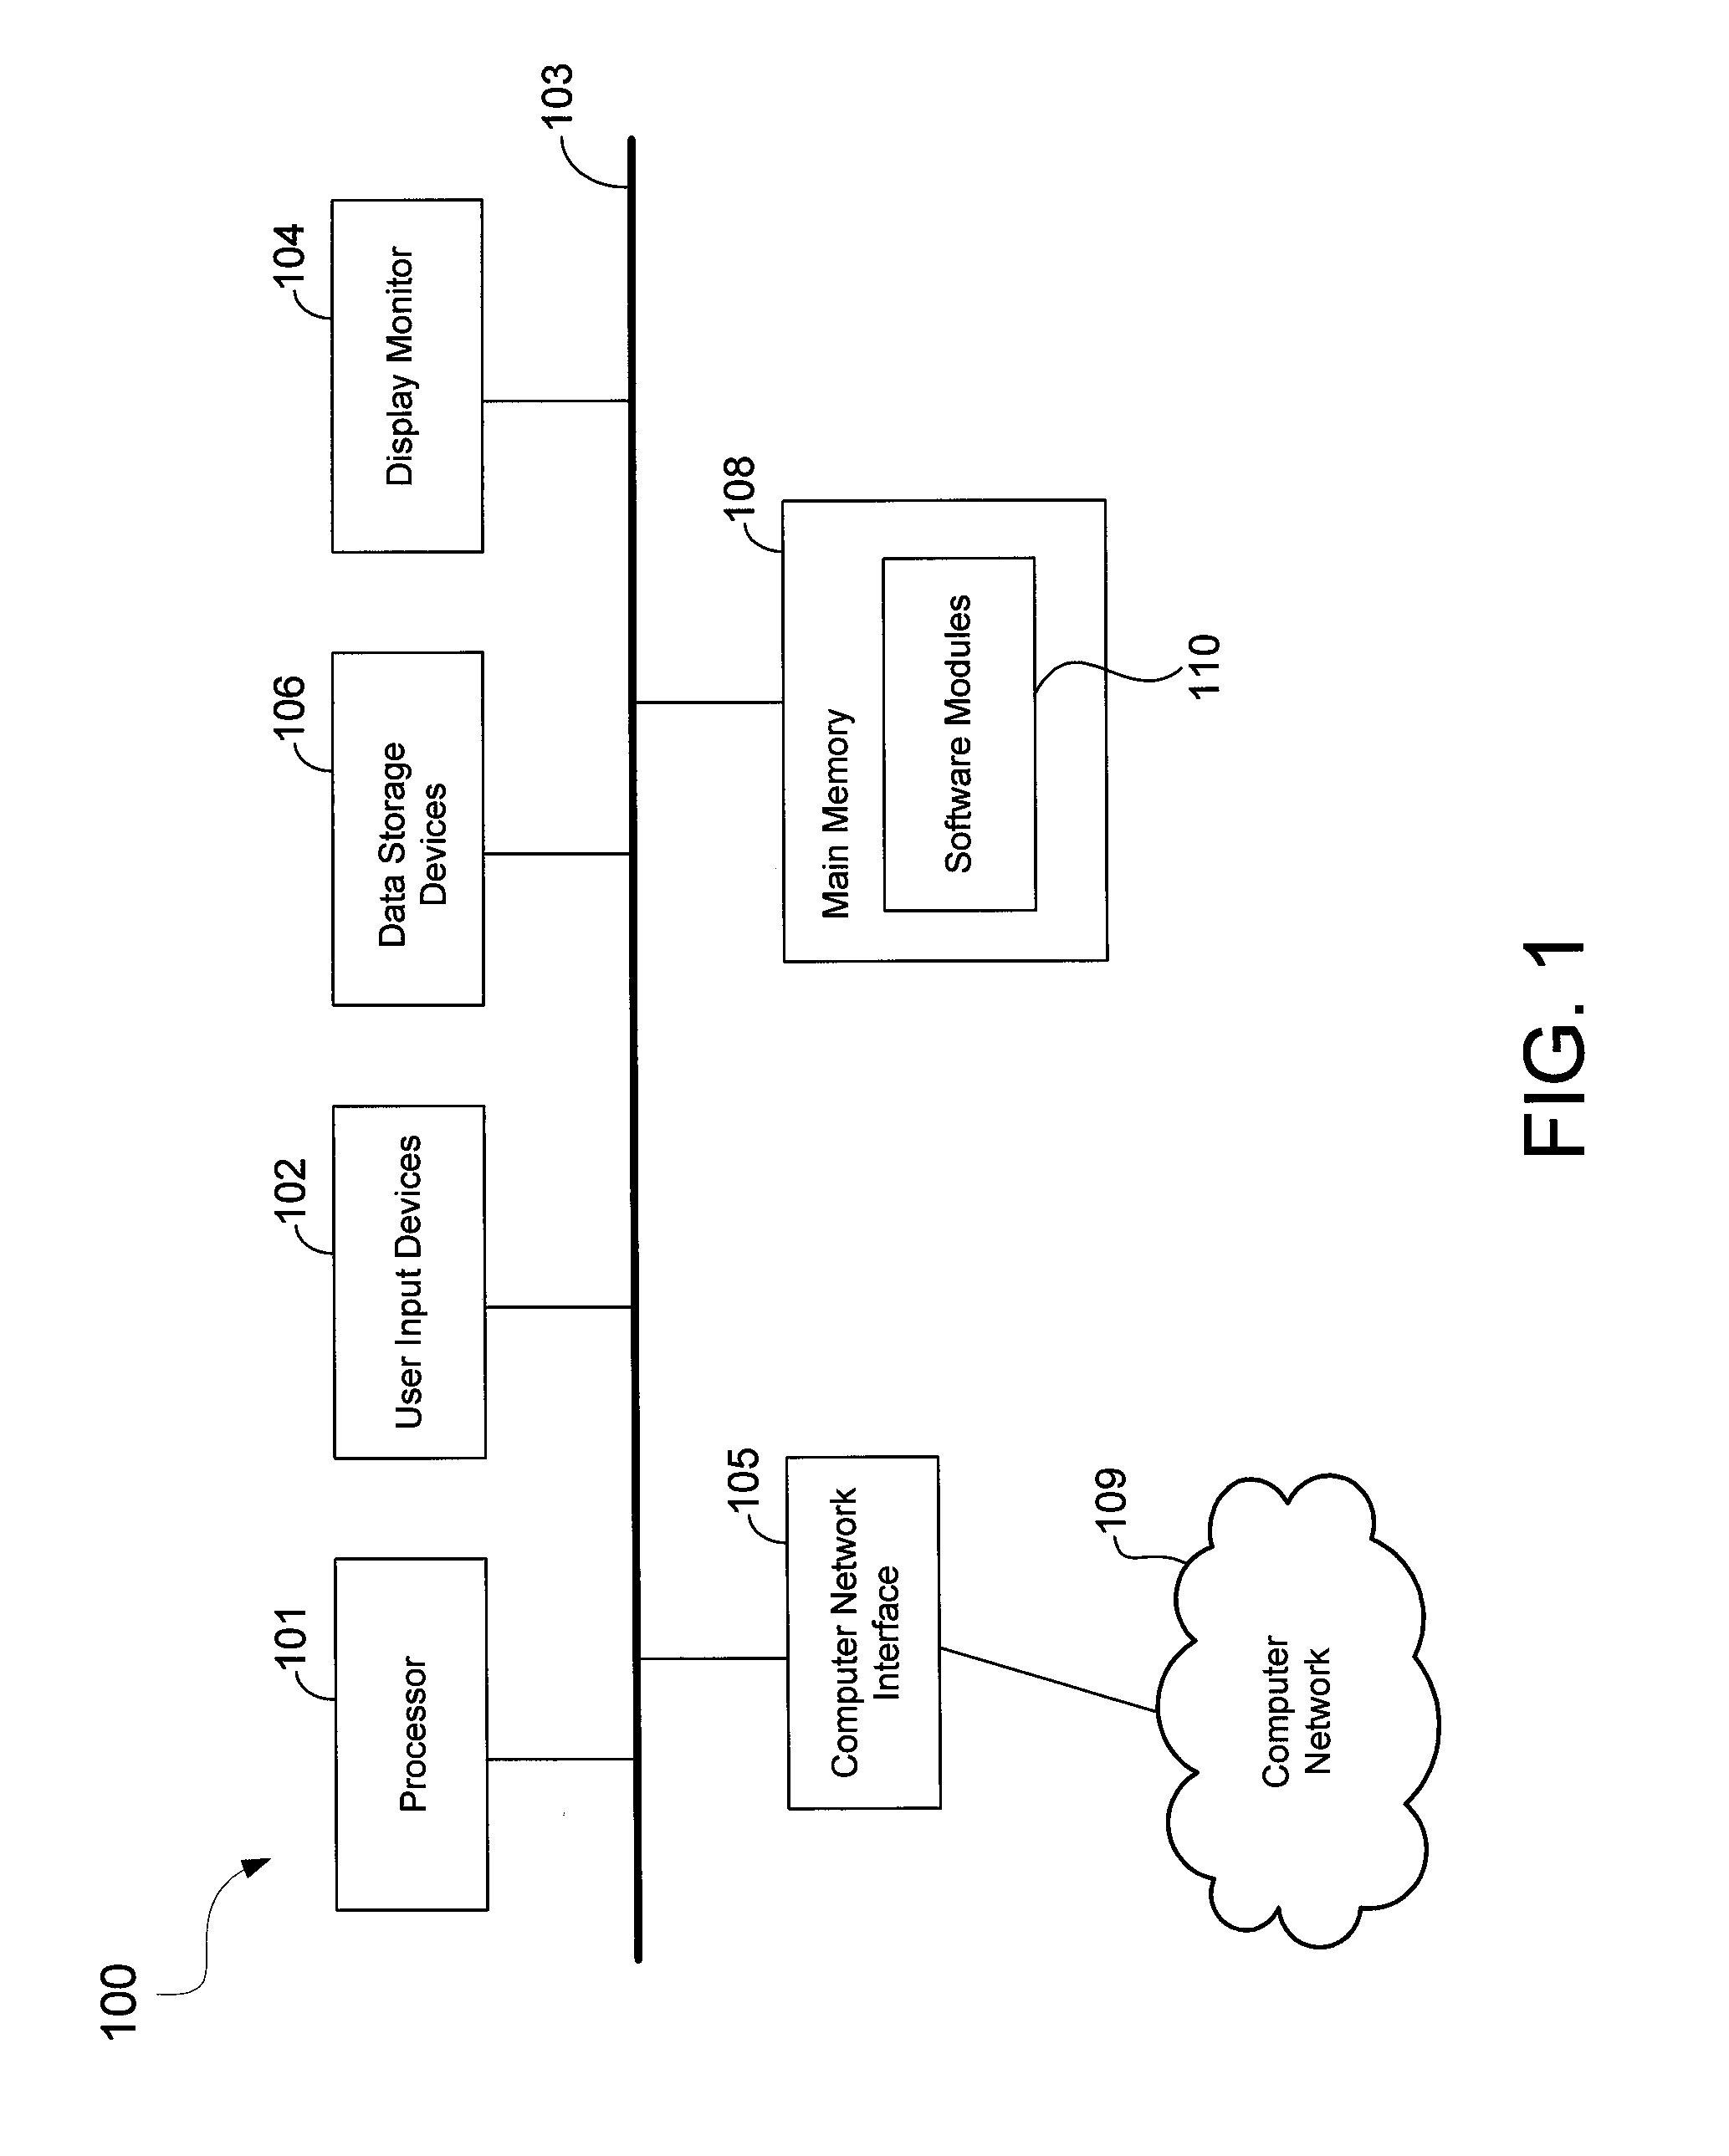 Apparatus and methods for detecting malicious scripts in web pages